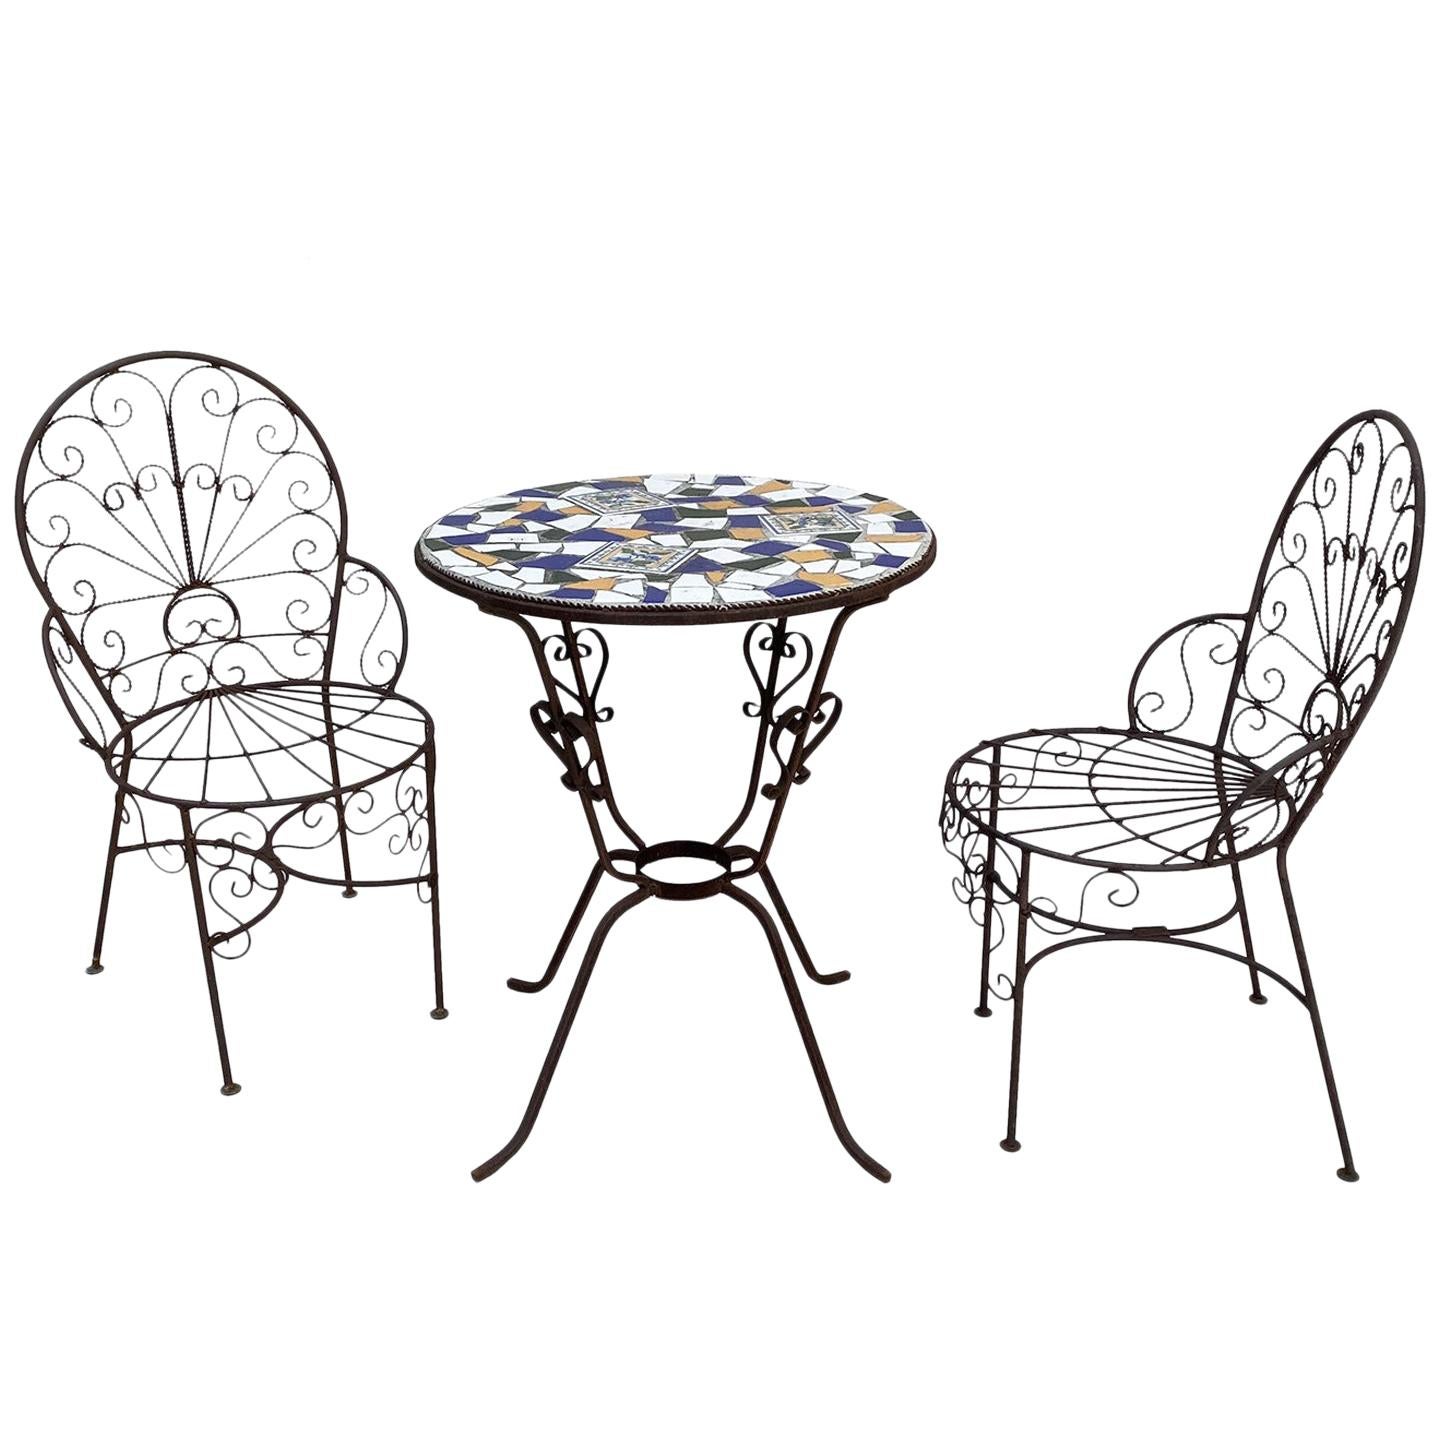 Italian Terrazzo Tile Cafe Table and Chairs, Set B For Sale